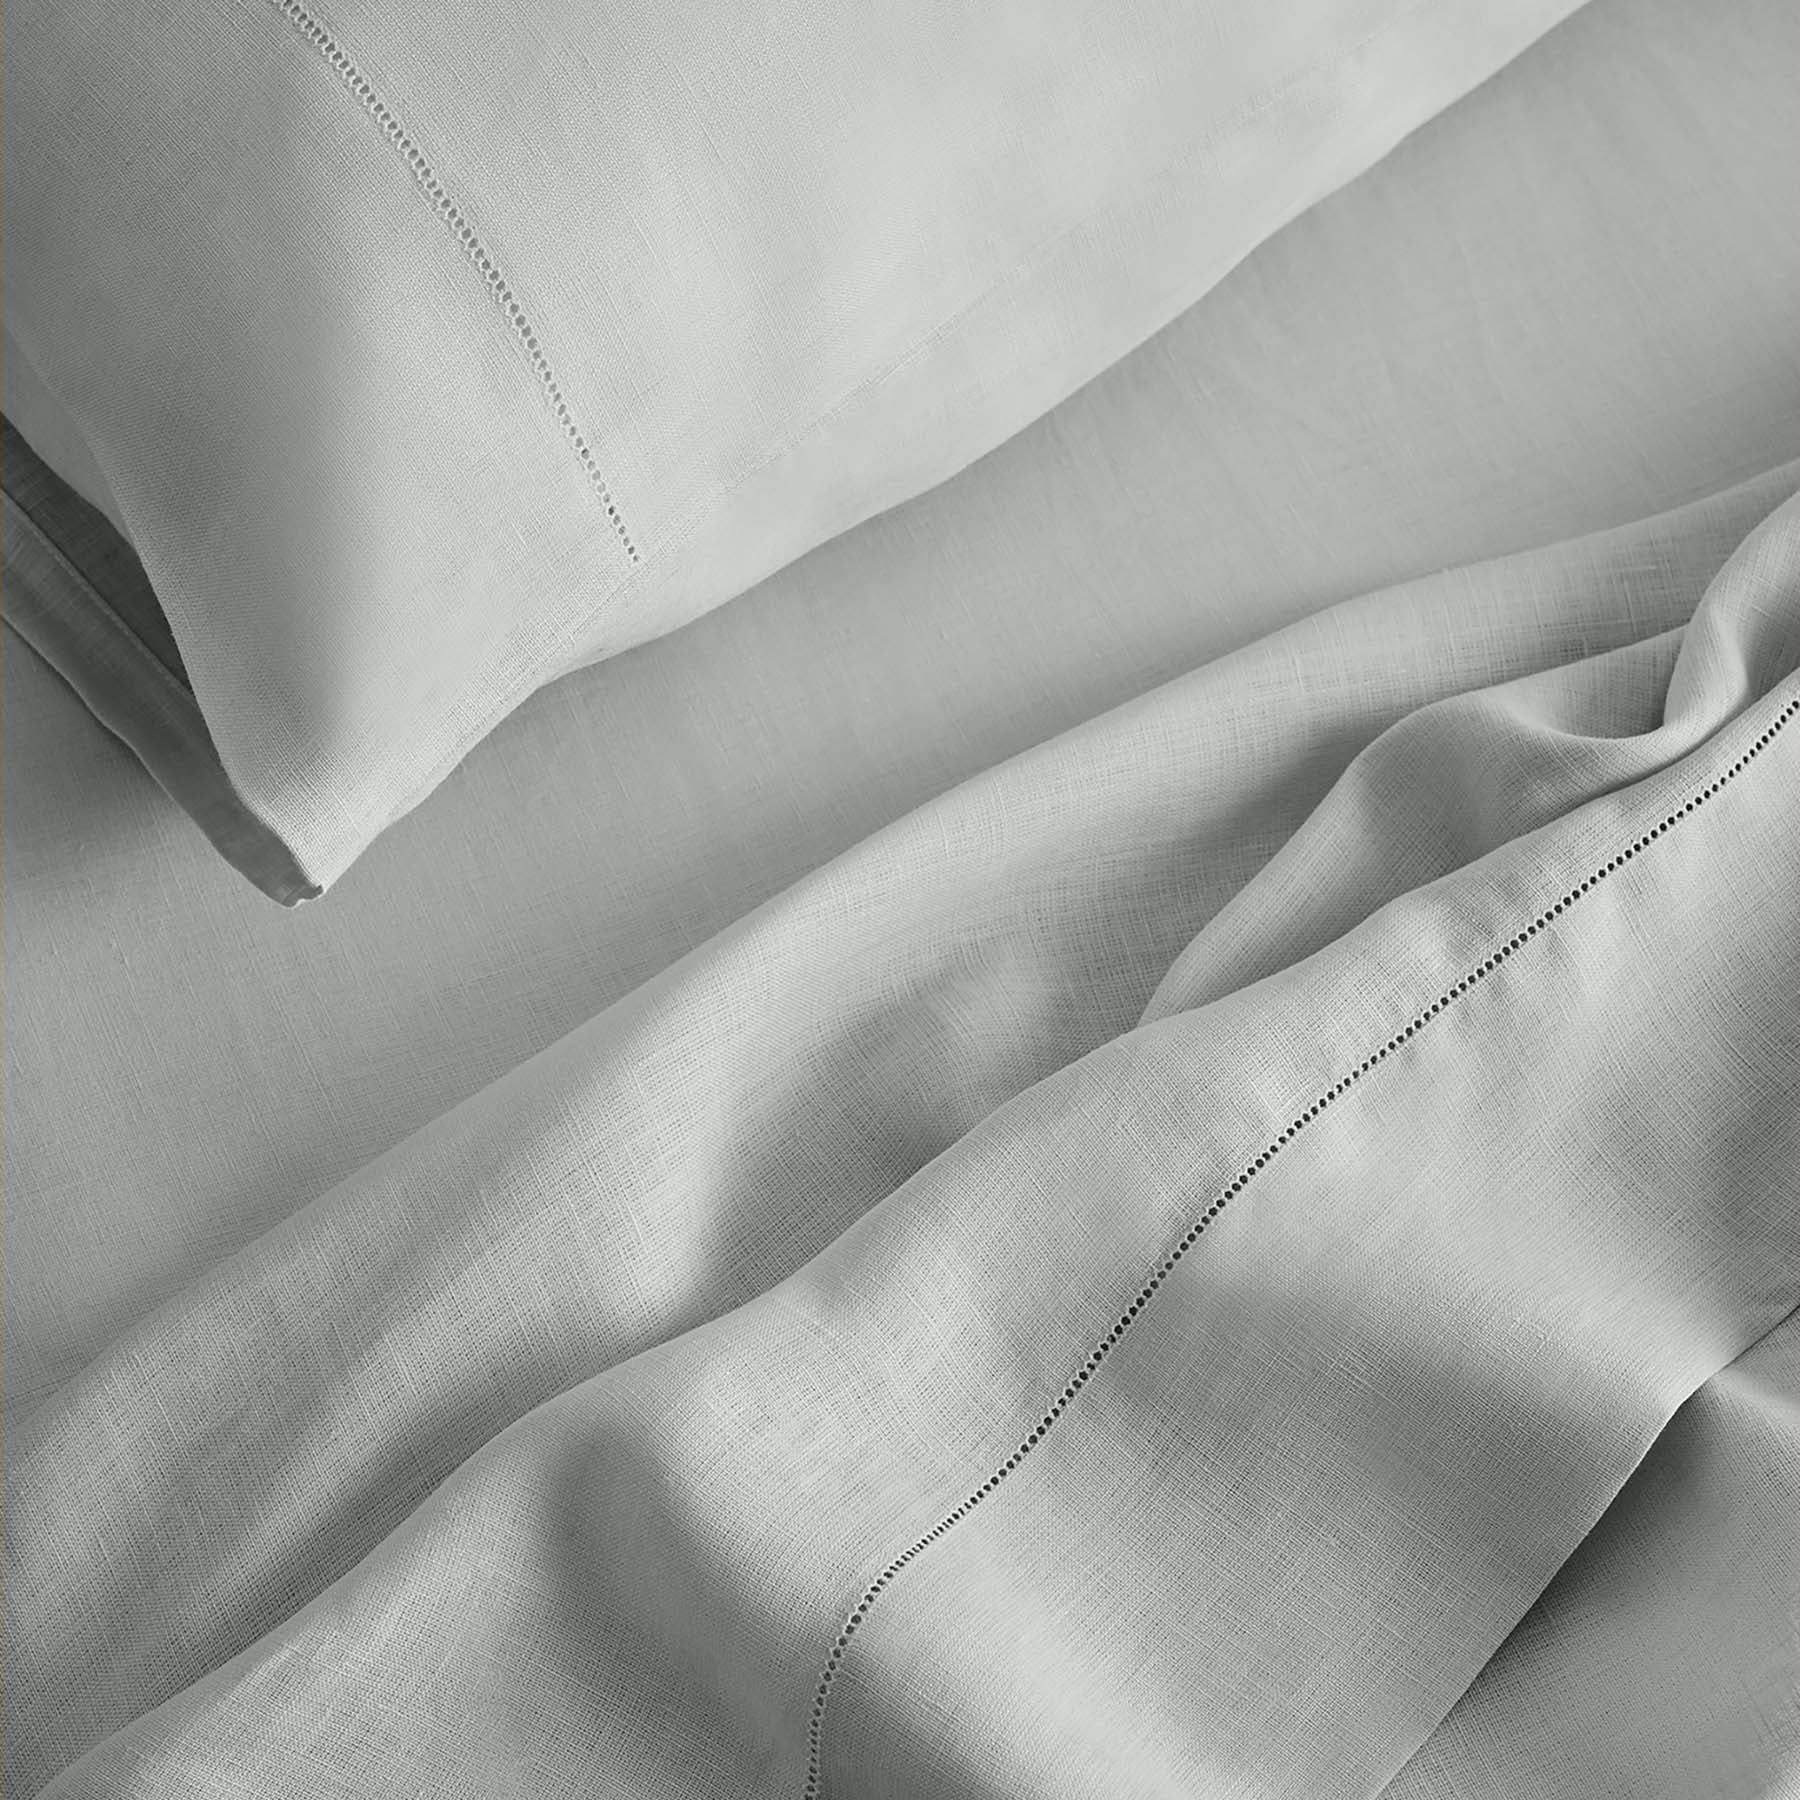 Kings & Queens Vintage Linen Sheet Set in Tin Fabric Detail